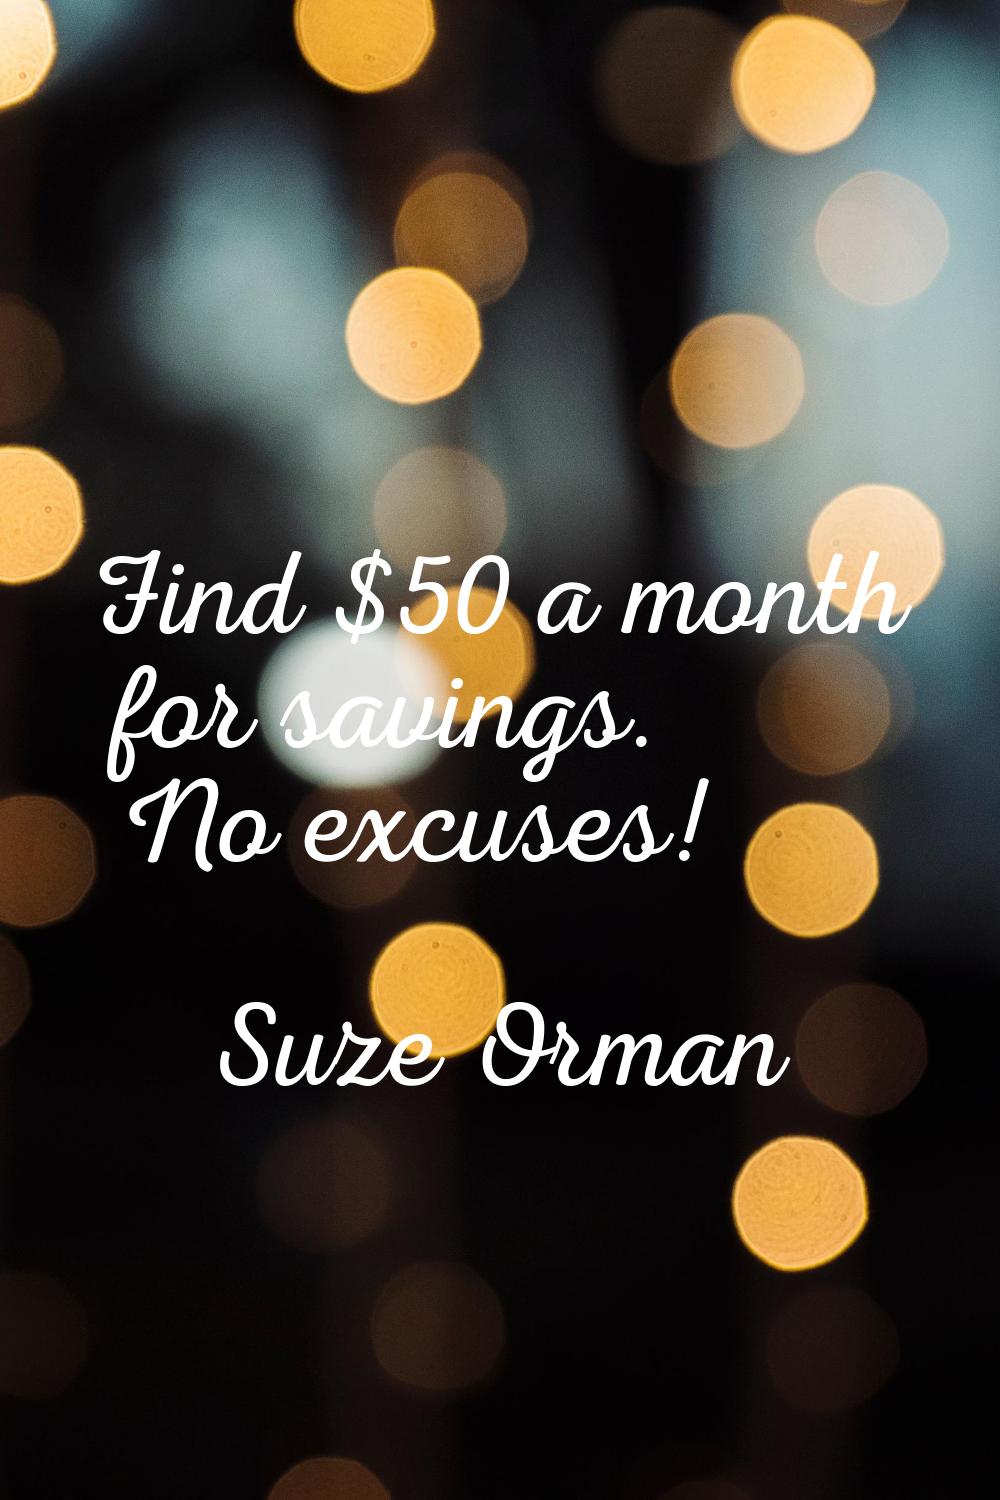 Find $50 a month for savings. No excuses!